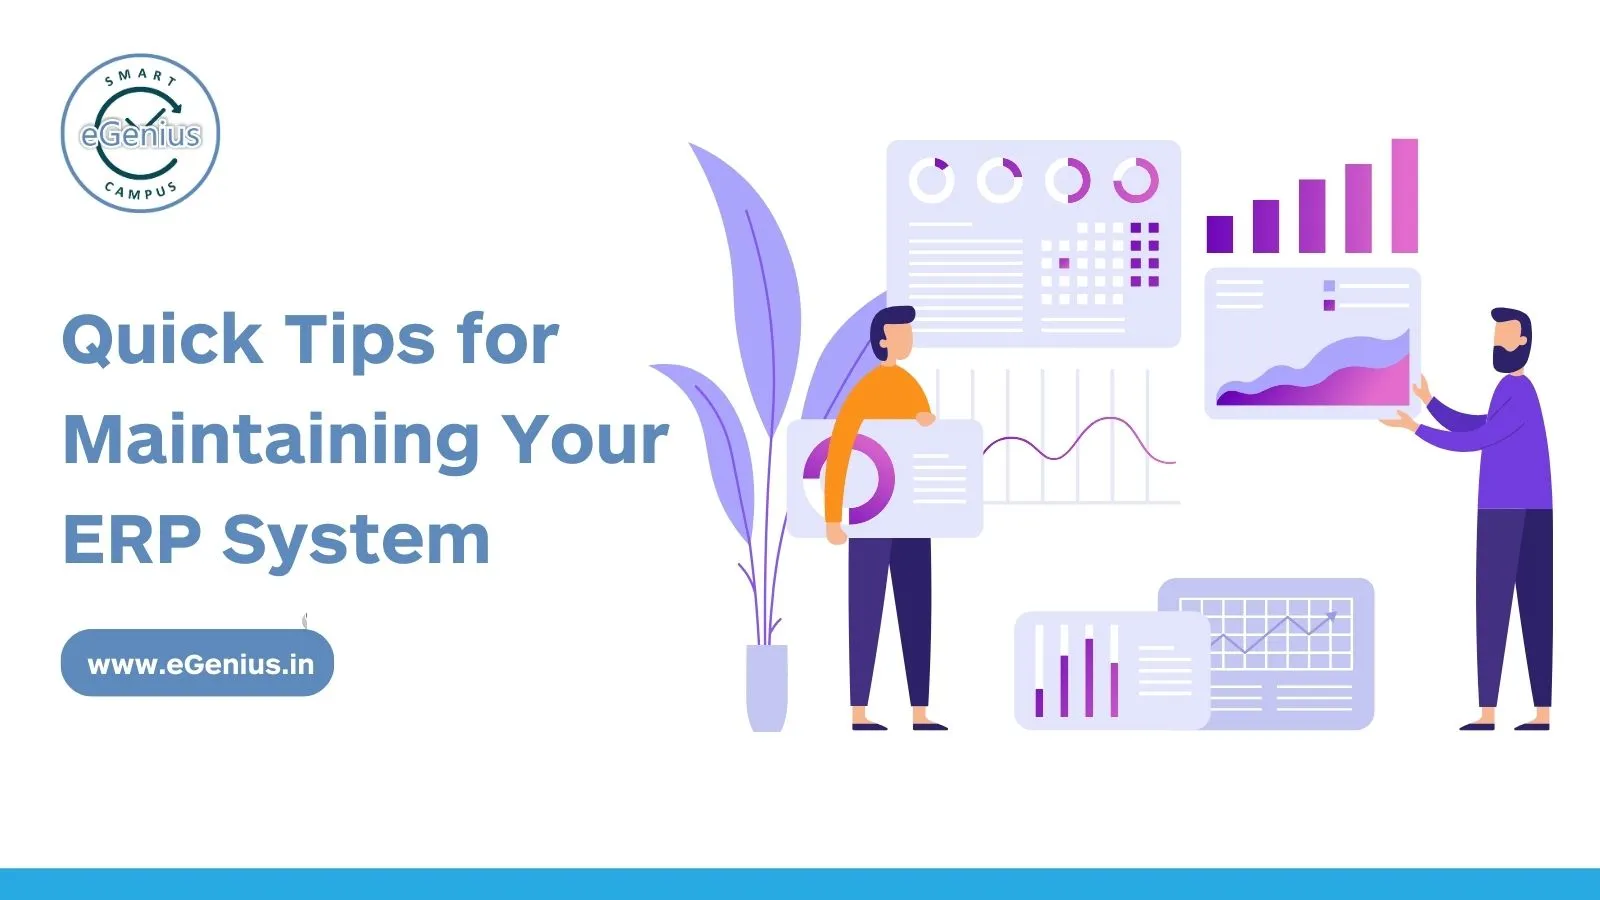 Quick Tips for Maintaining Your ERP (Enterprise Resource Planning) System 